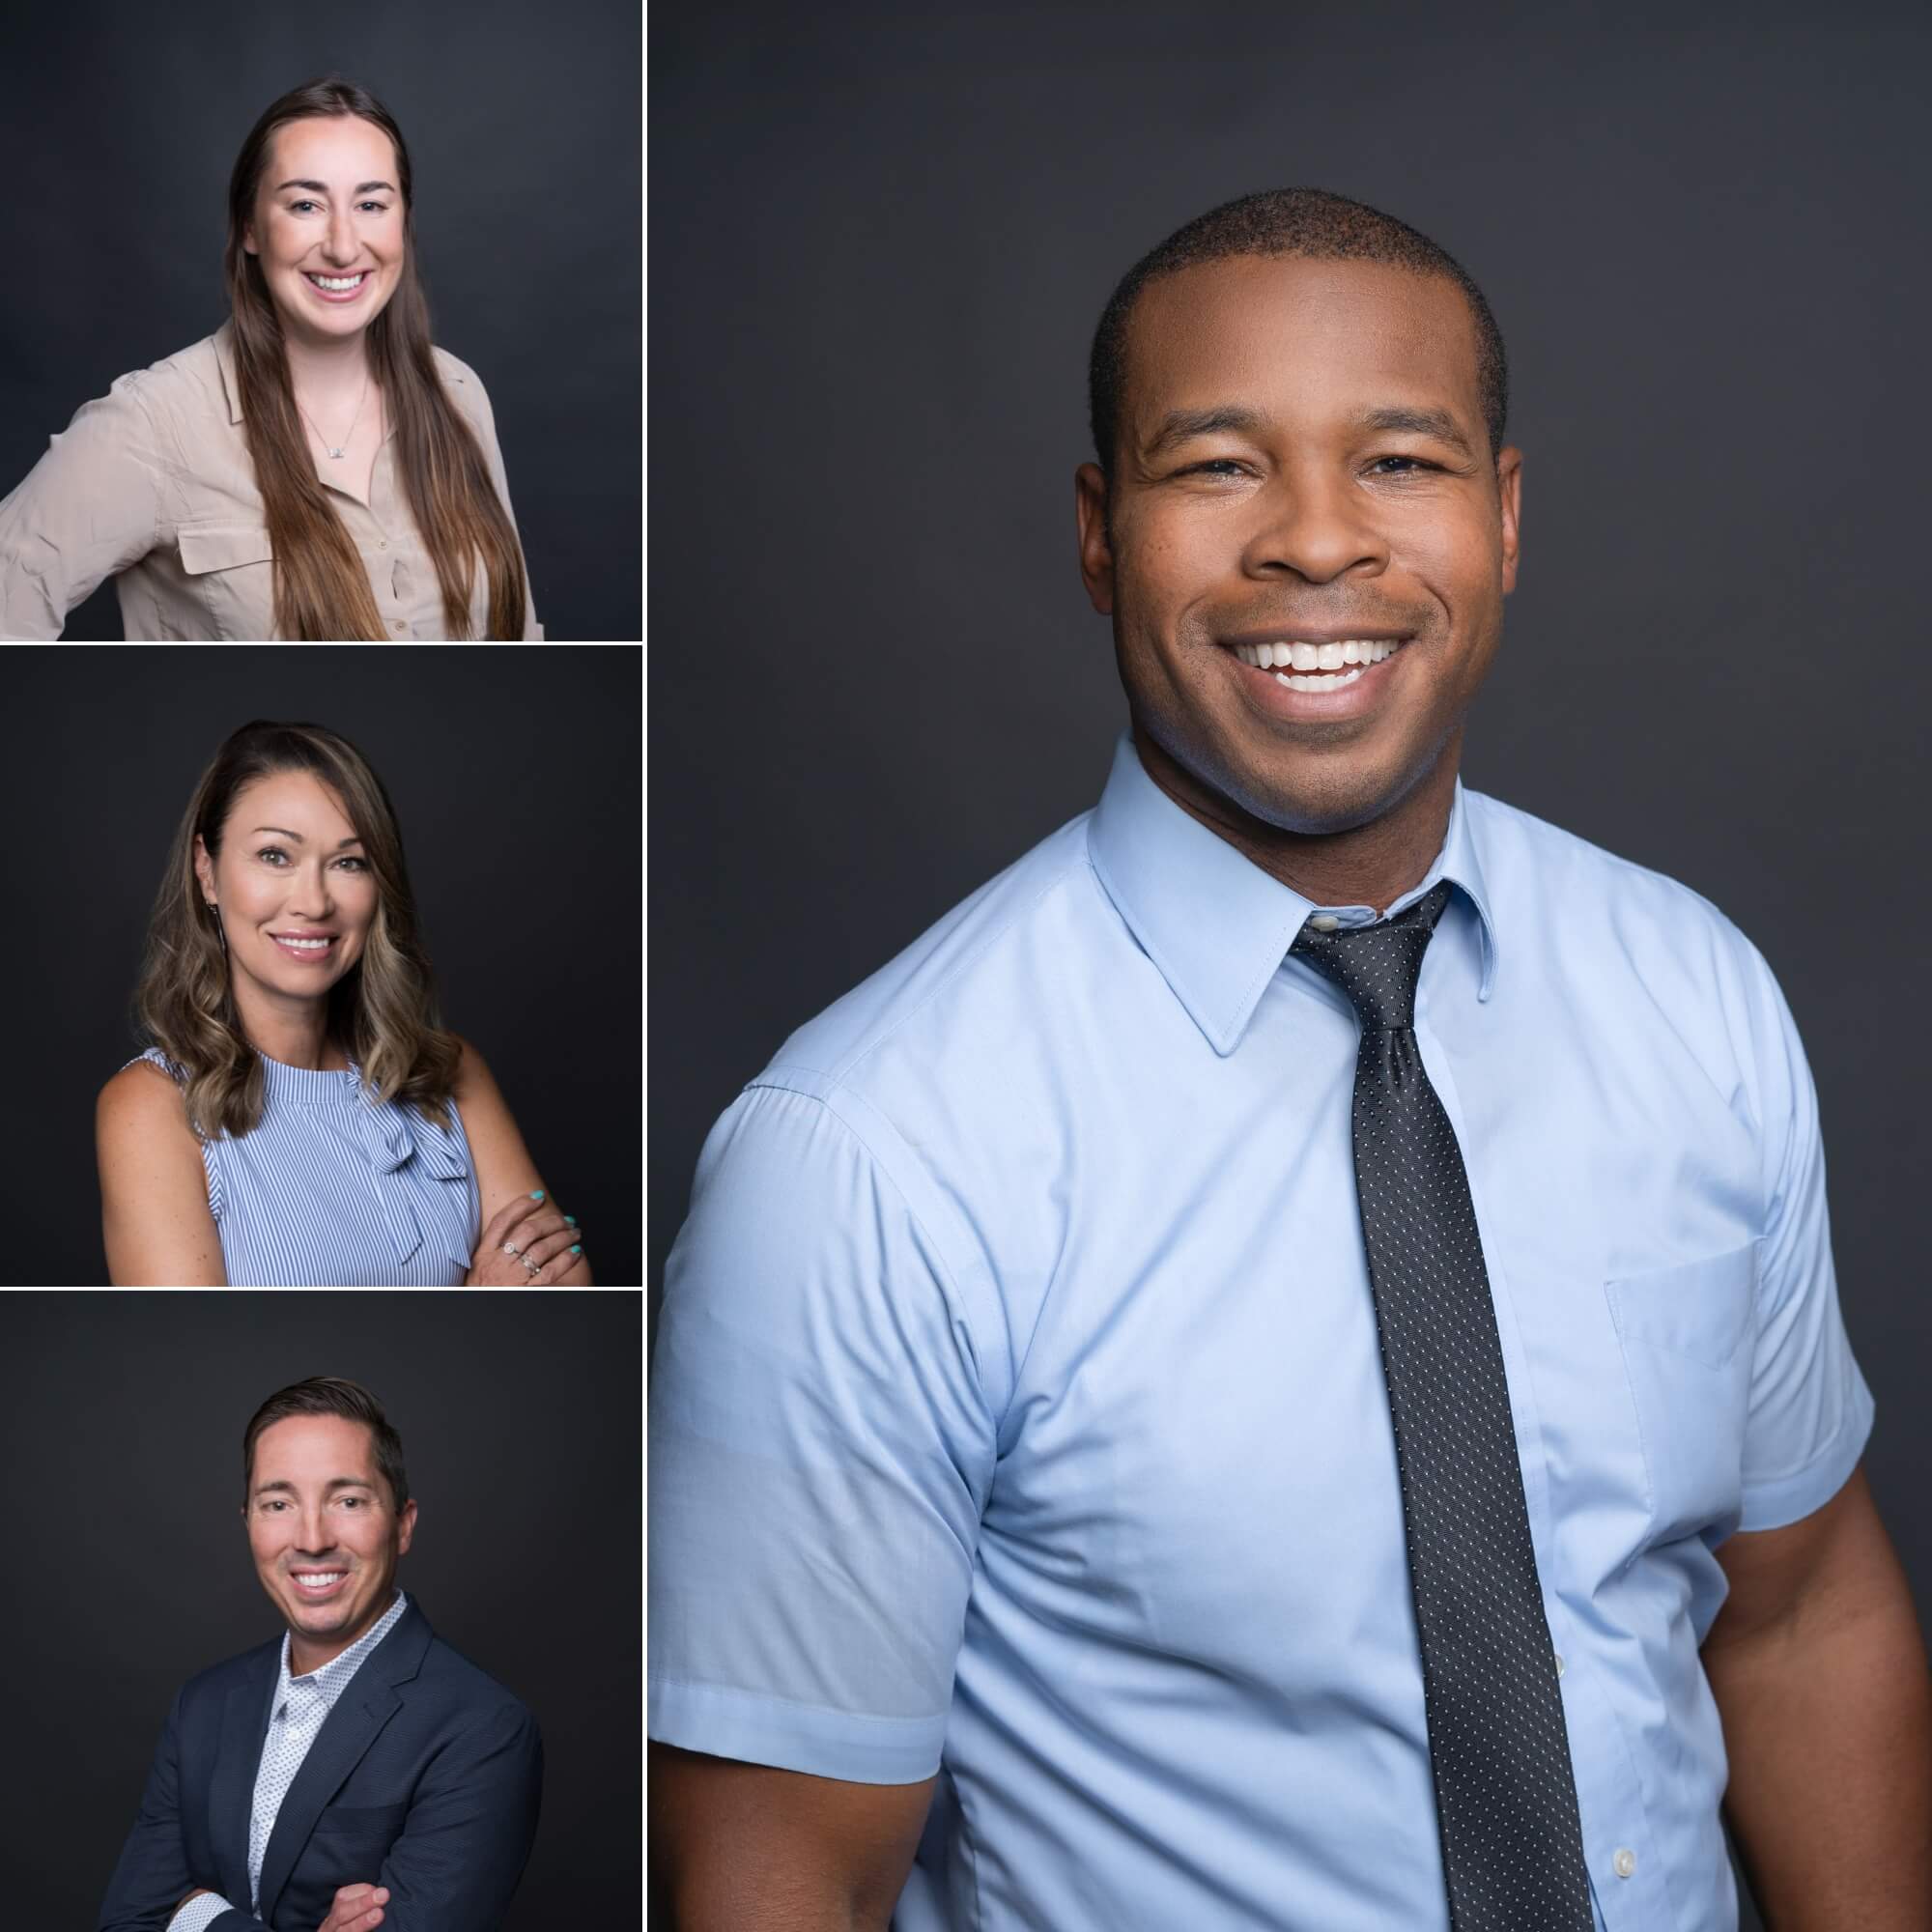 corporate team headshot photography pricing example